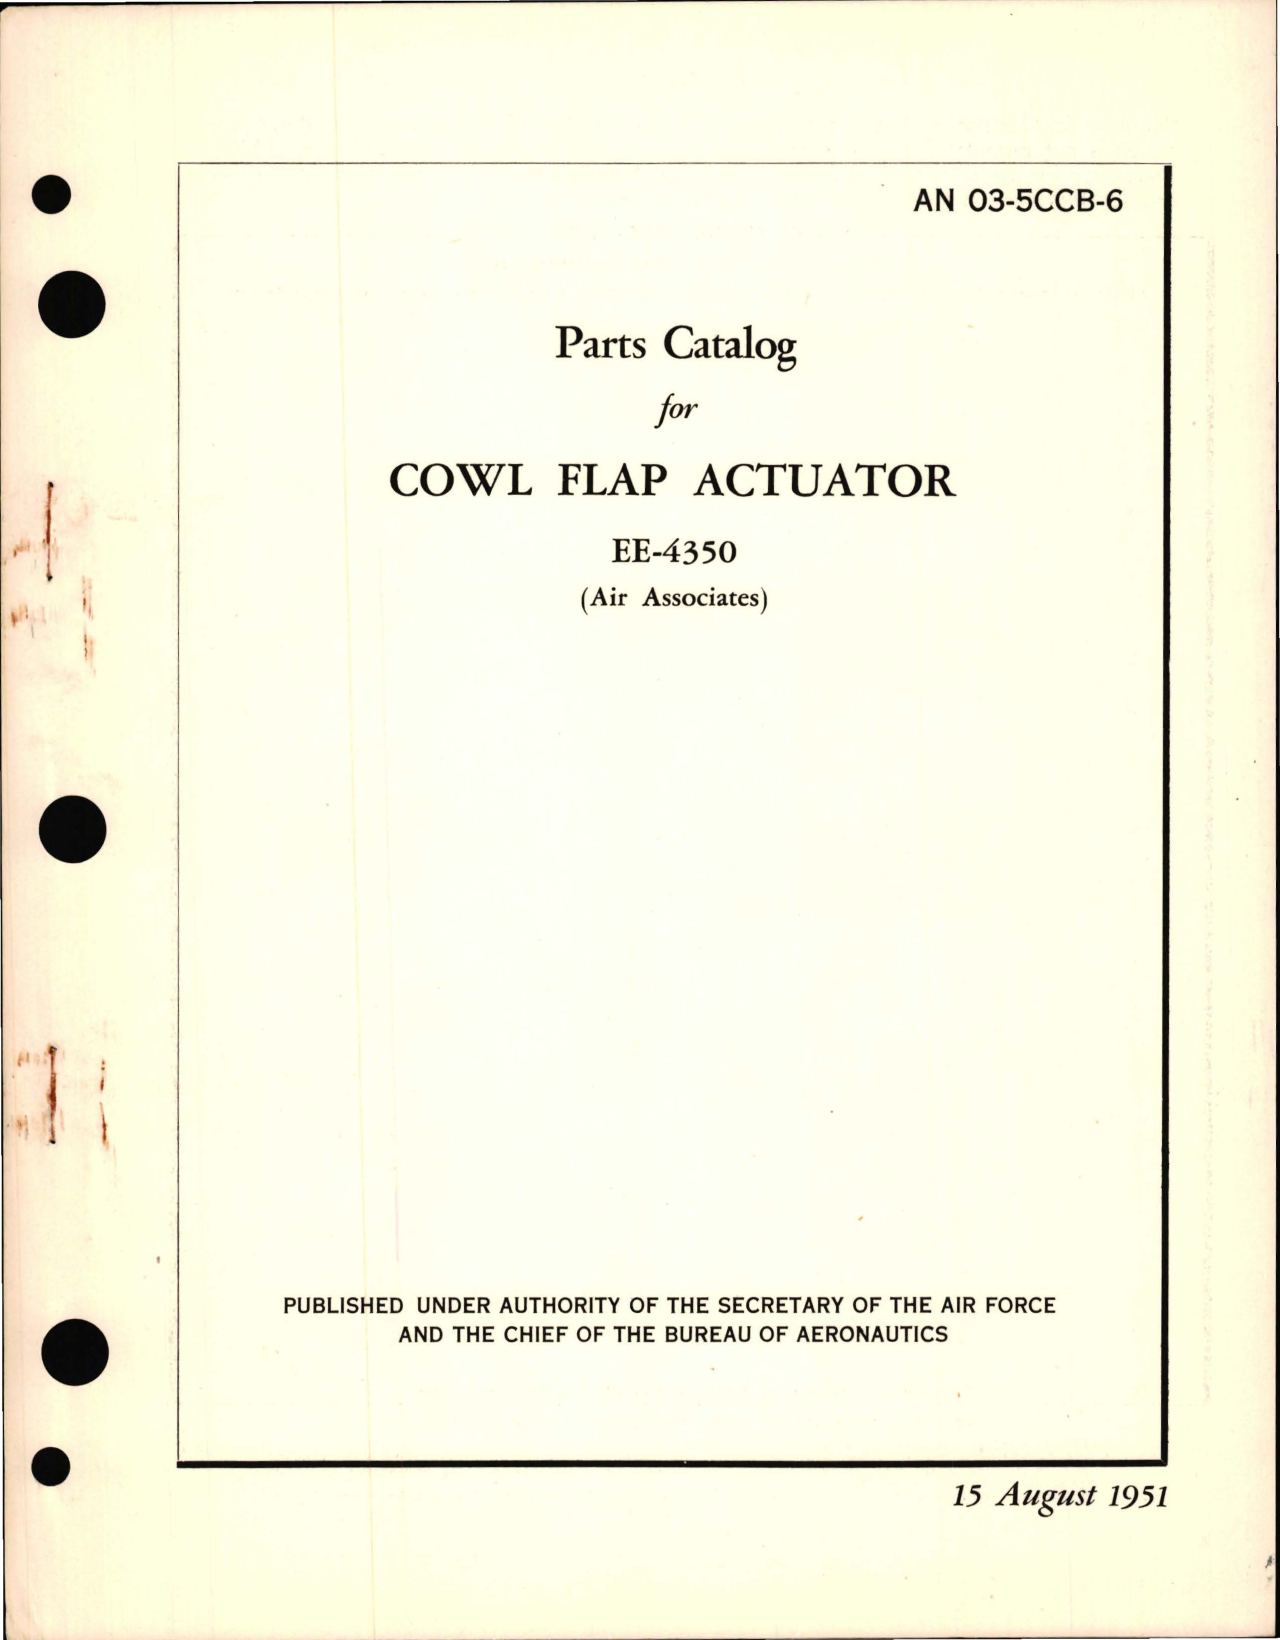 Sample page 1 from AirCorps Library document: Parts Catalog for Cowl Flap Actuator EE-4350 